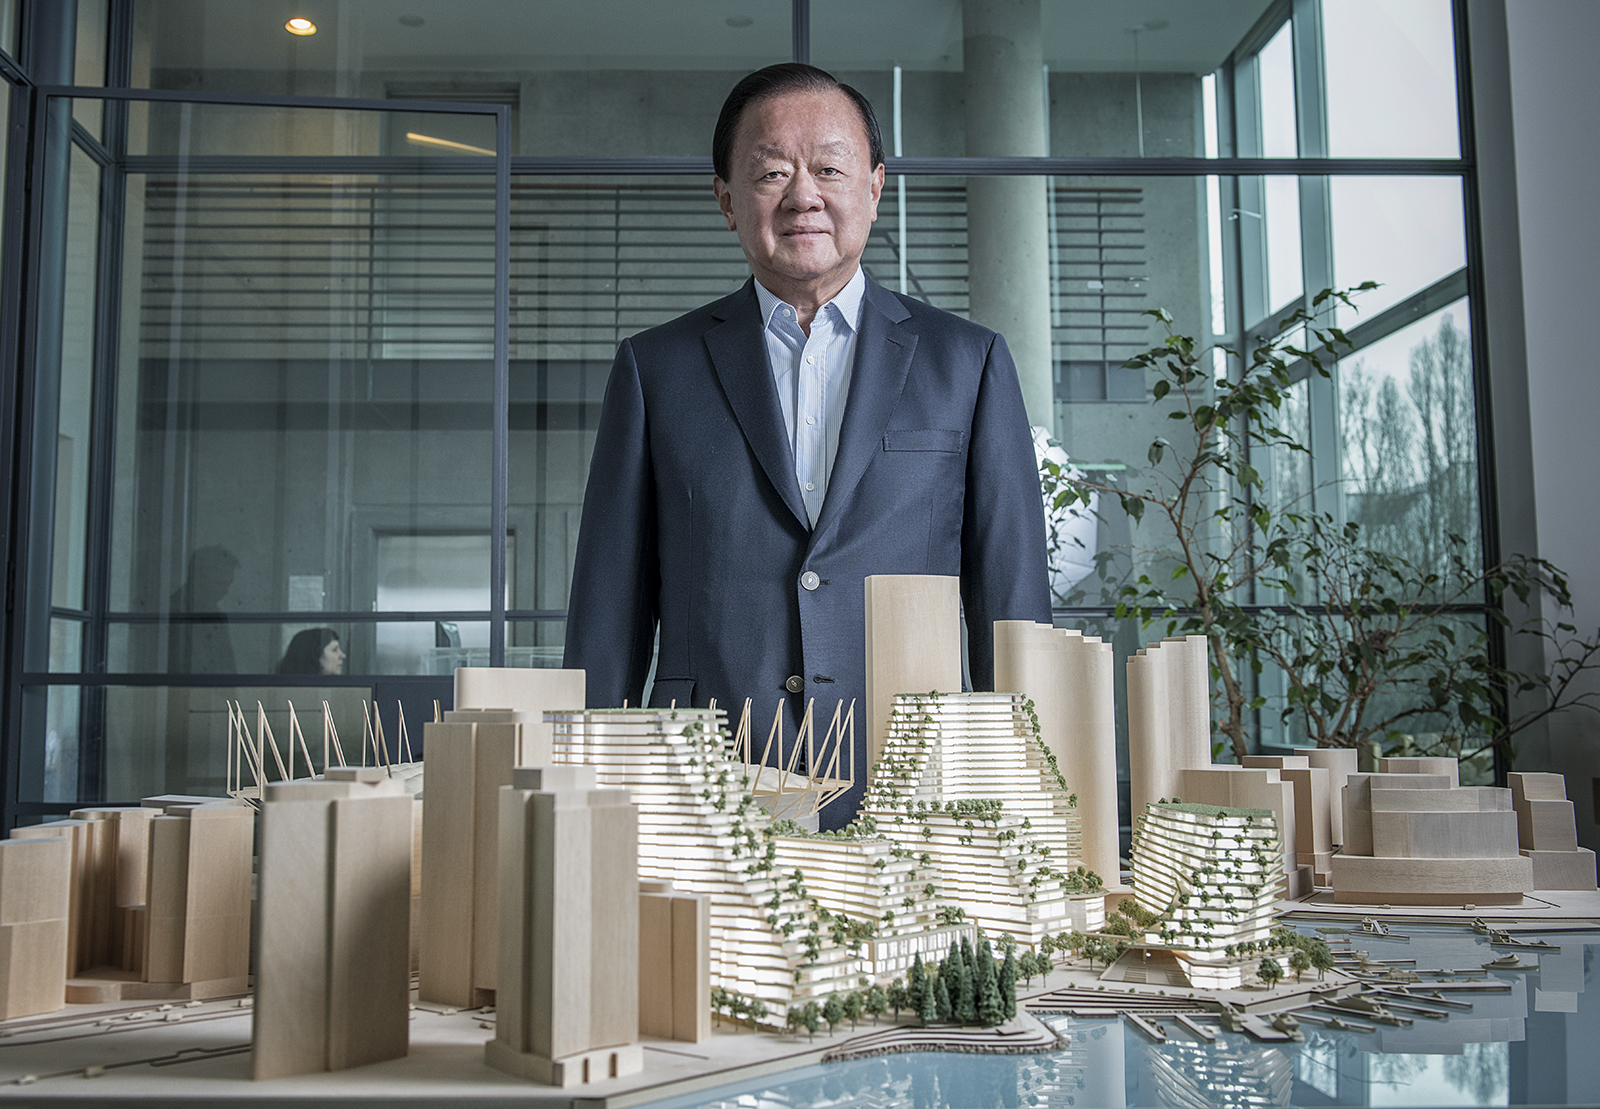 vancouver, property, Photo of Oei Hong Leong with an architectural model